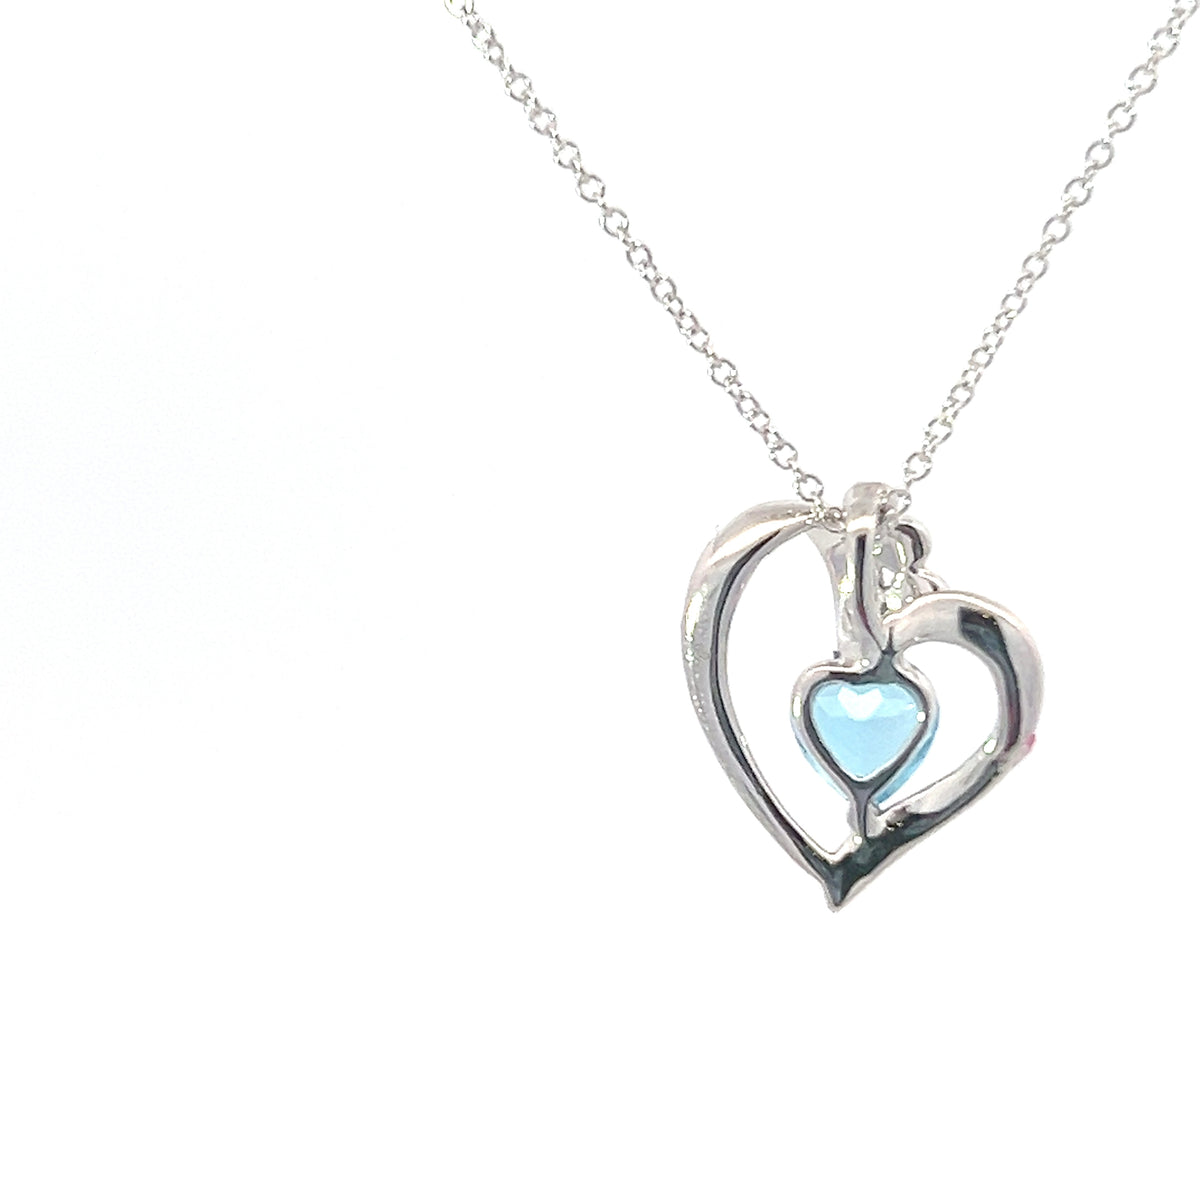 10K White Gold Blue Topaz and 0.005cttw Diamond Heart Necklace - 18 Inches